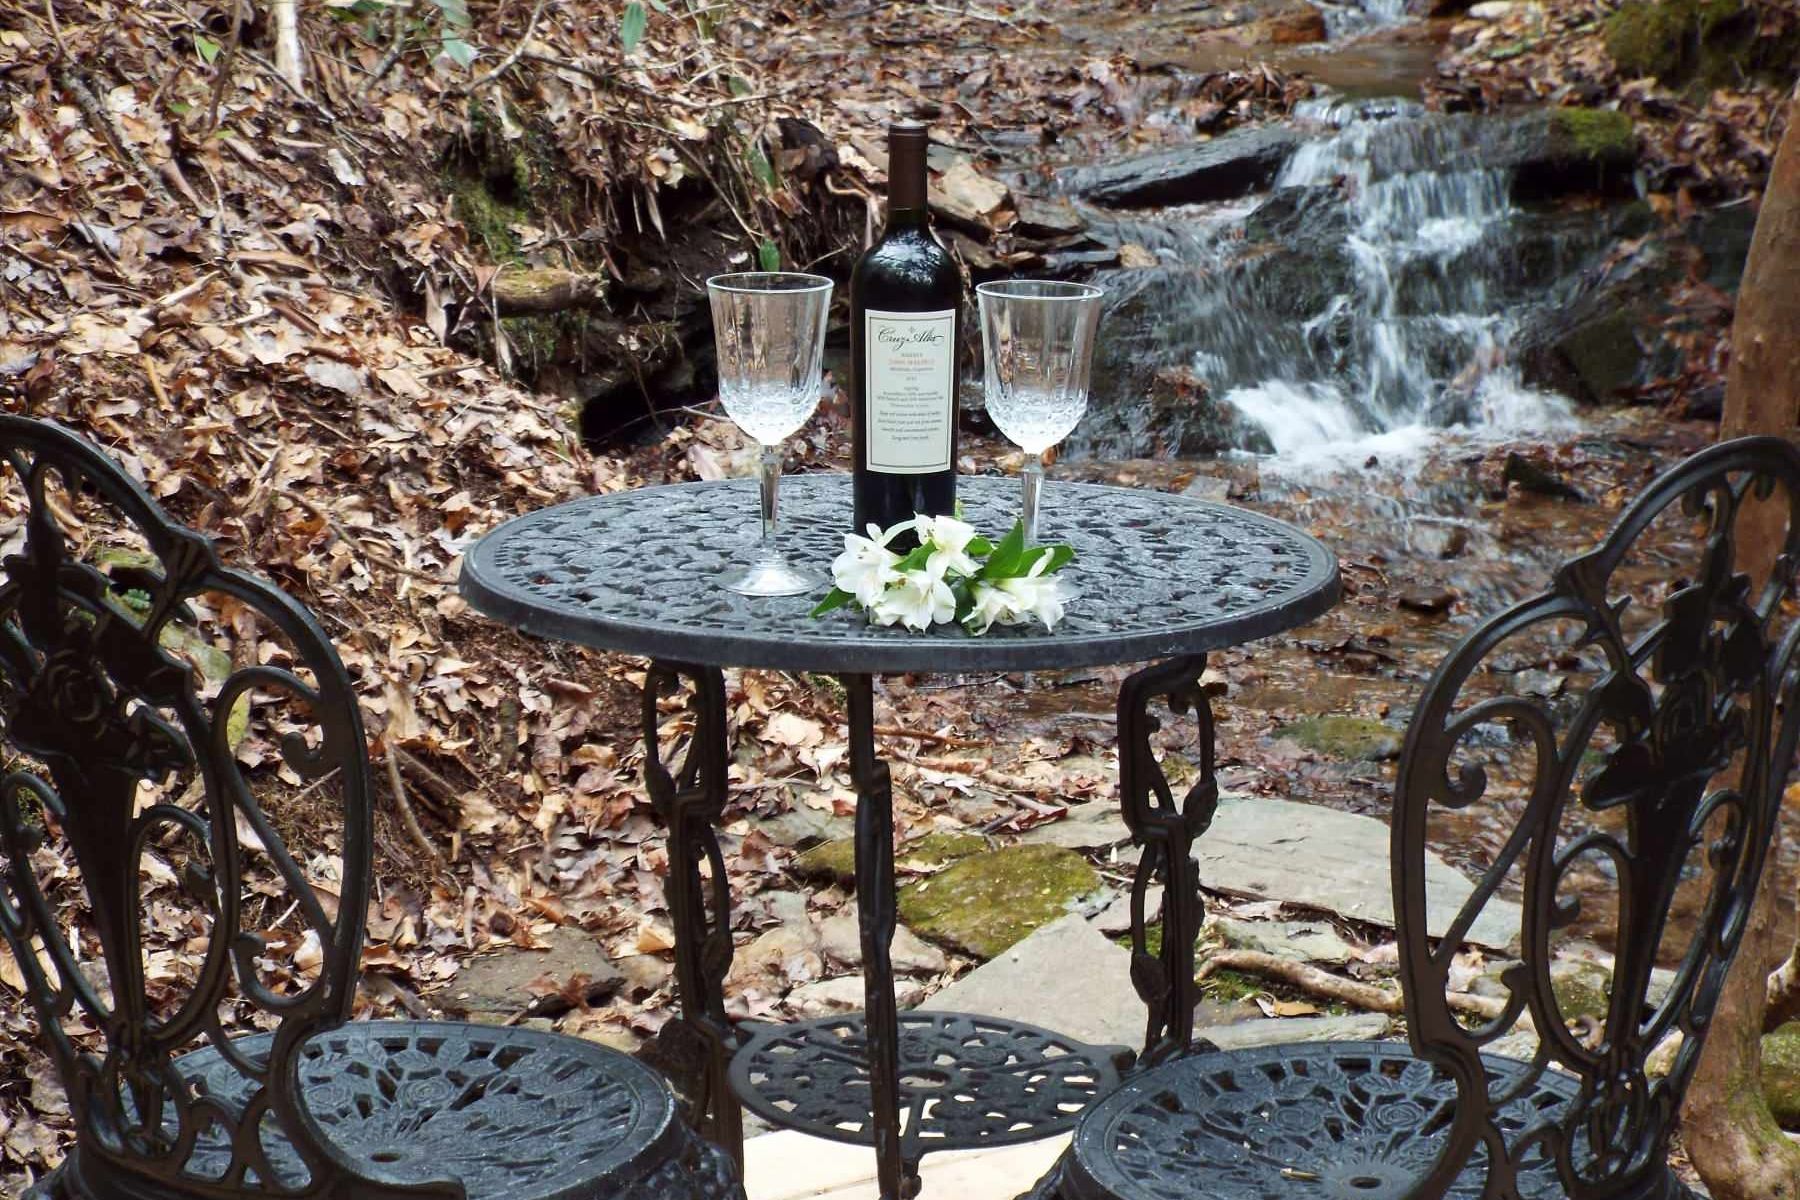 A table with a bottle of wine and two glasses on it in front of a waterfall.